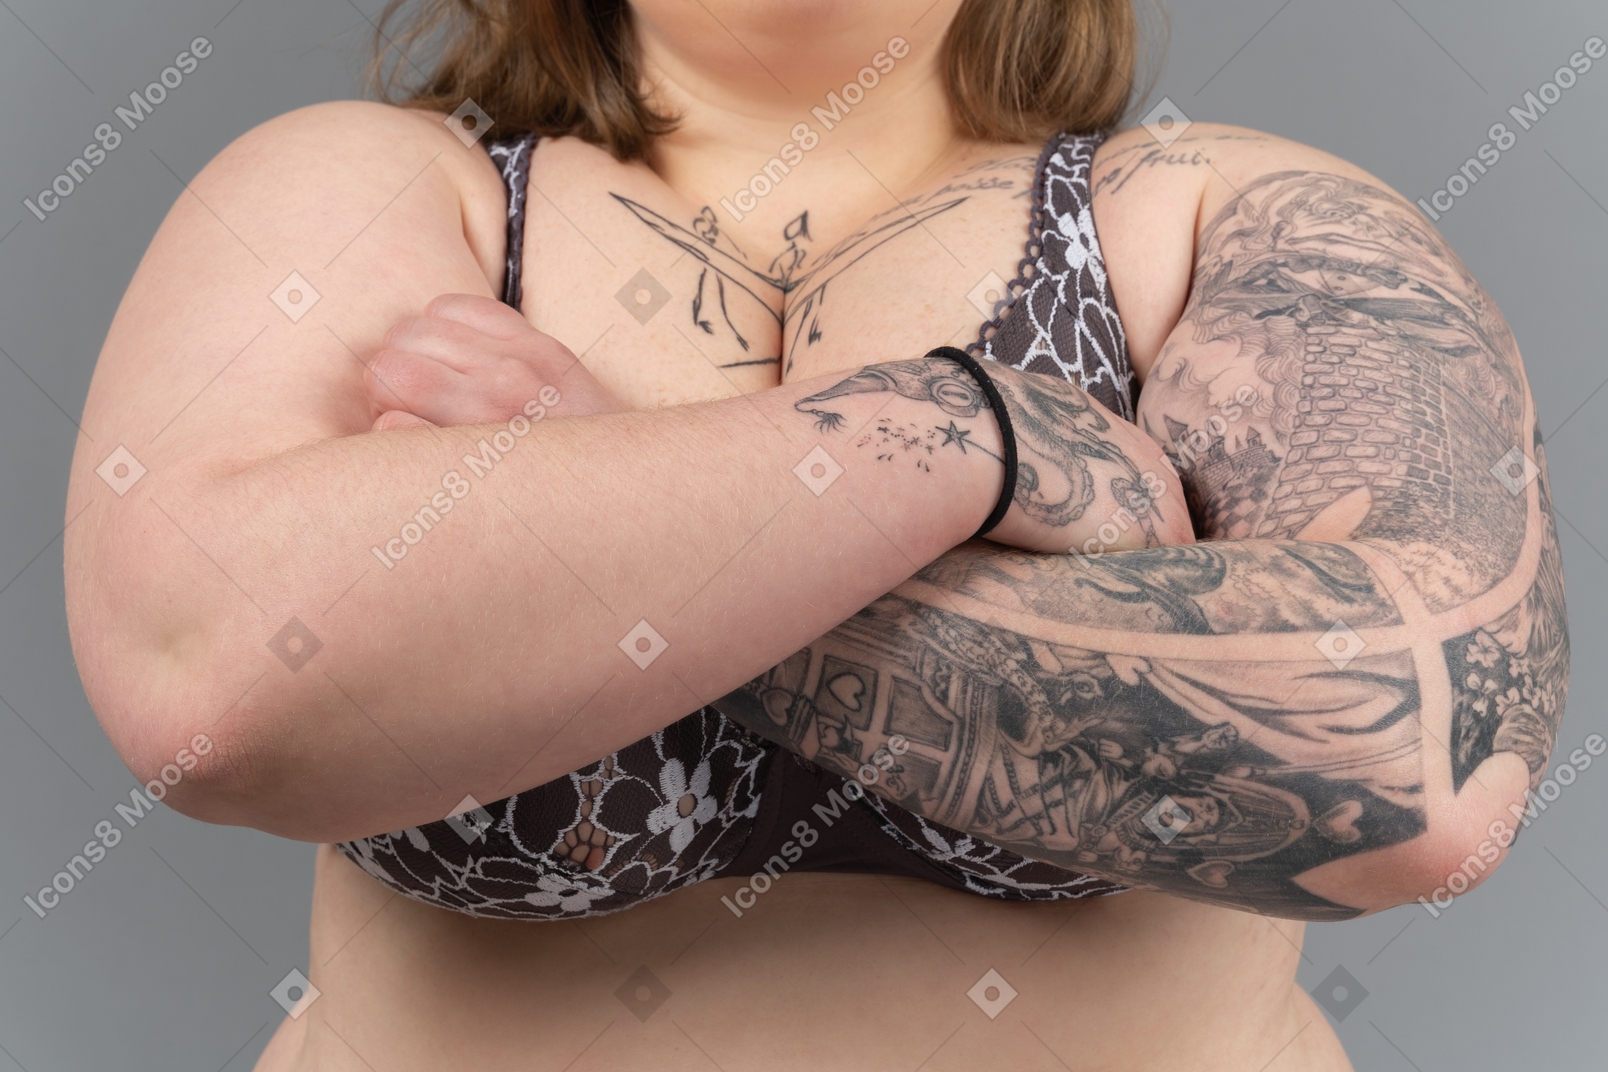 Serious plump woman standing with her arms crossed